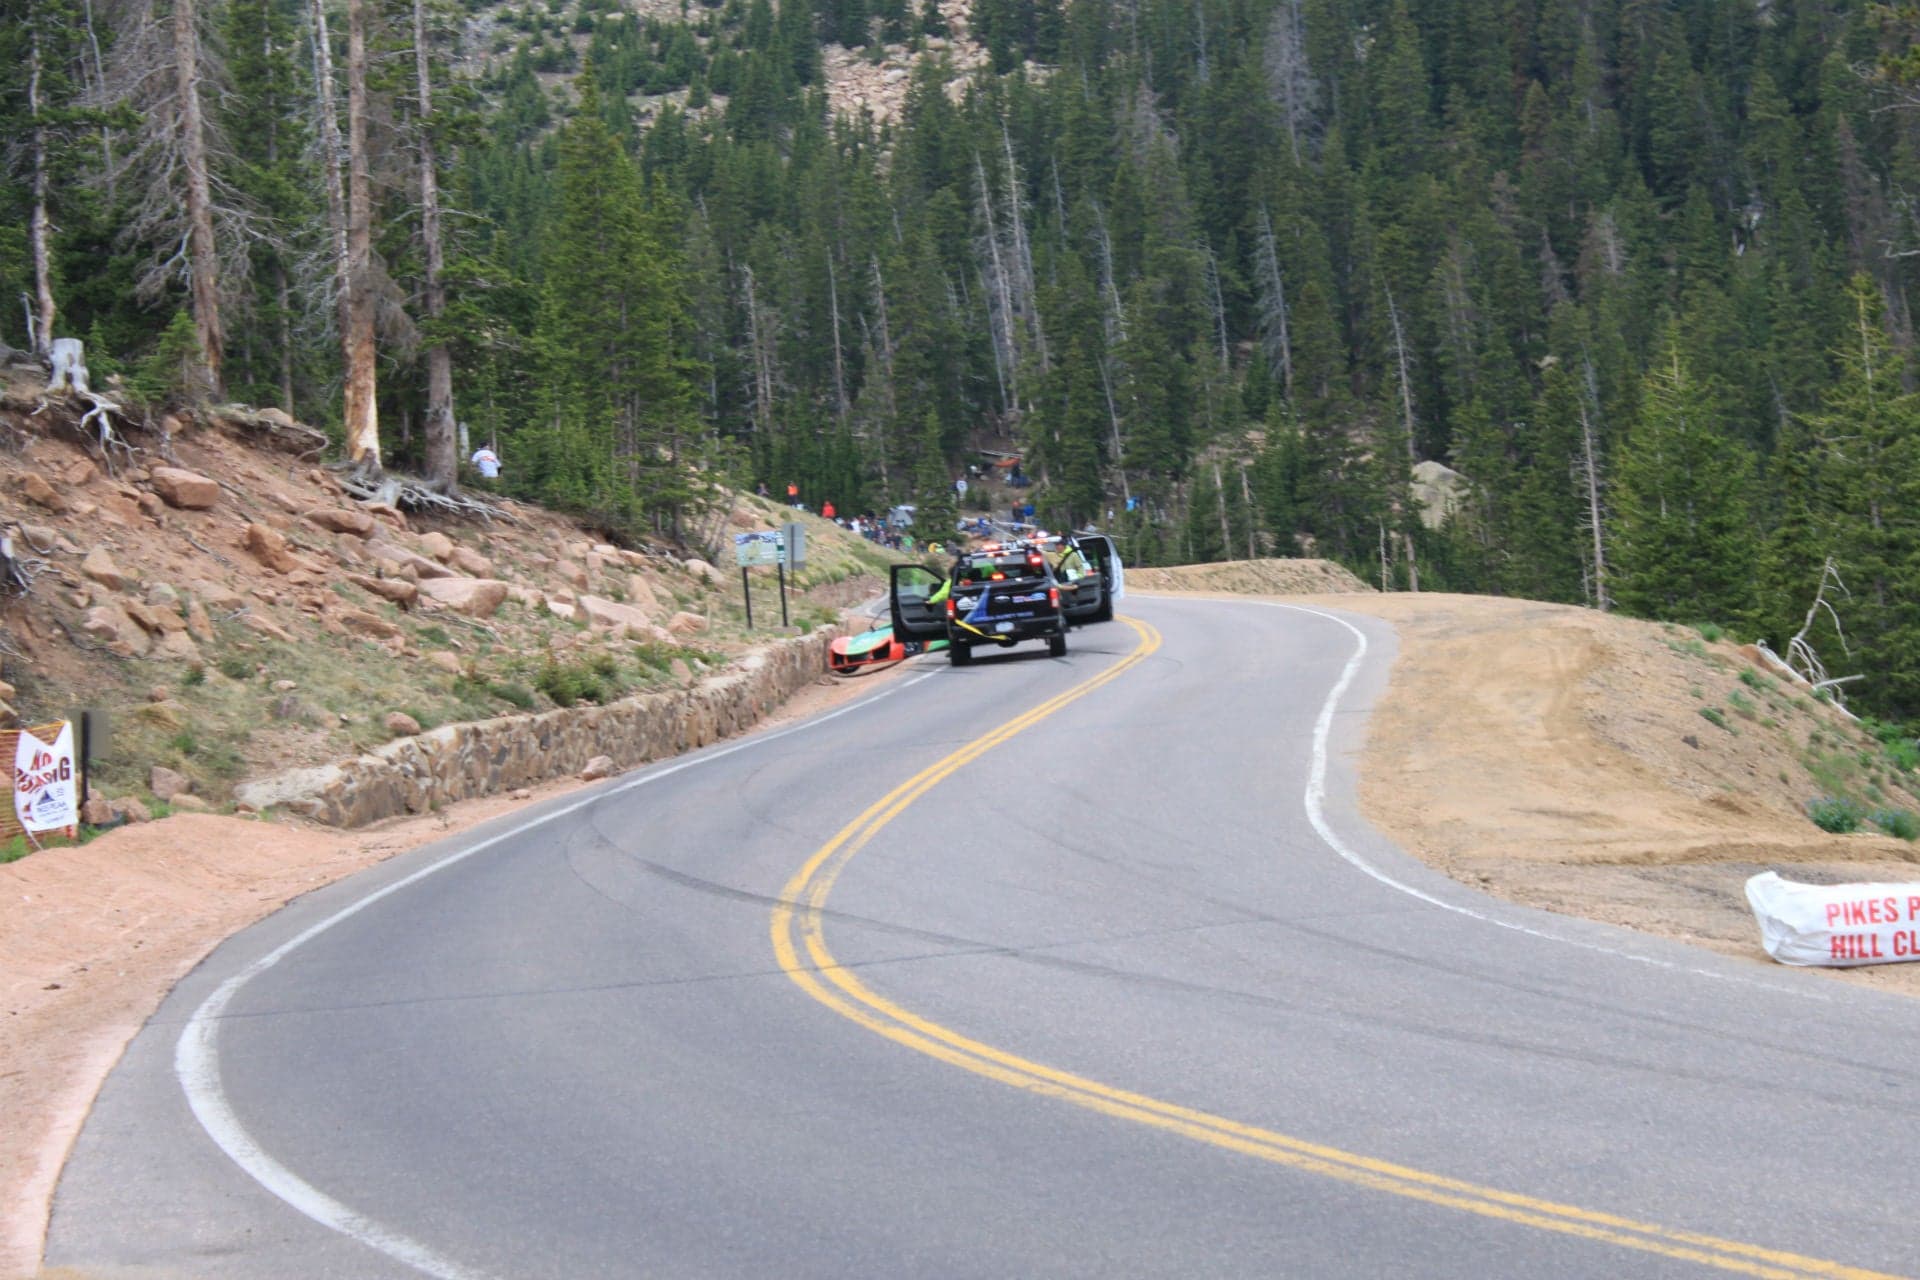 Man Trying to Help Crashed Racer at Pikes Peak Gets Rounded up by Police